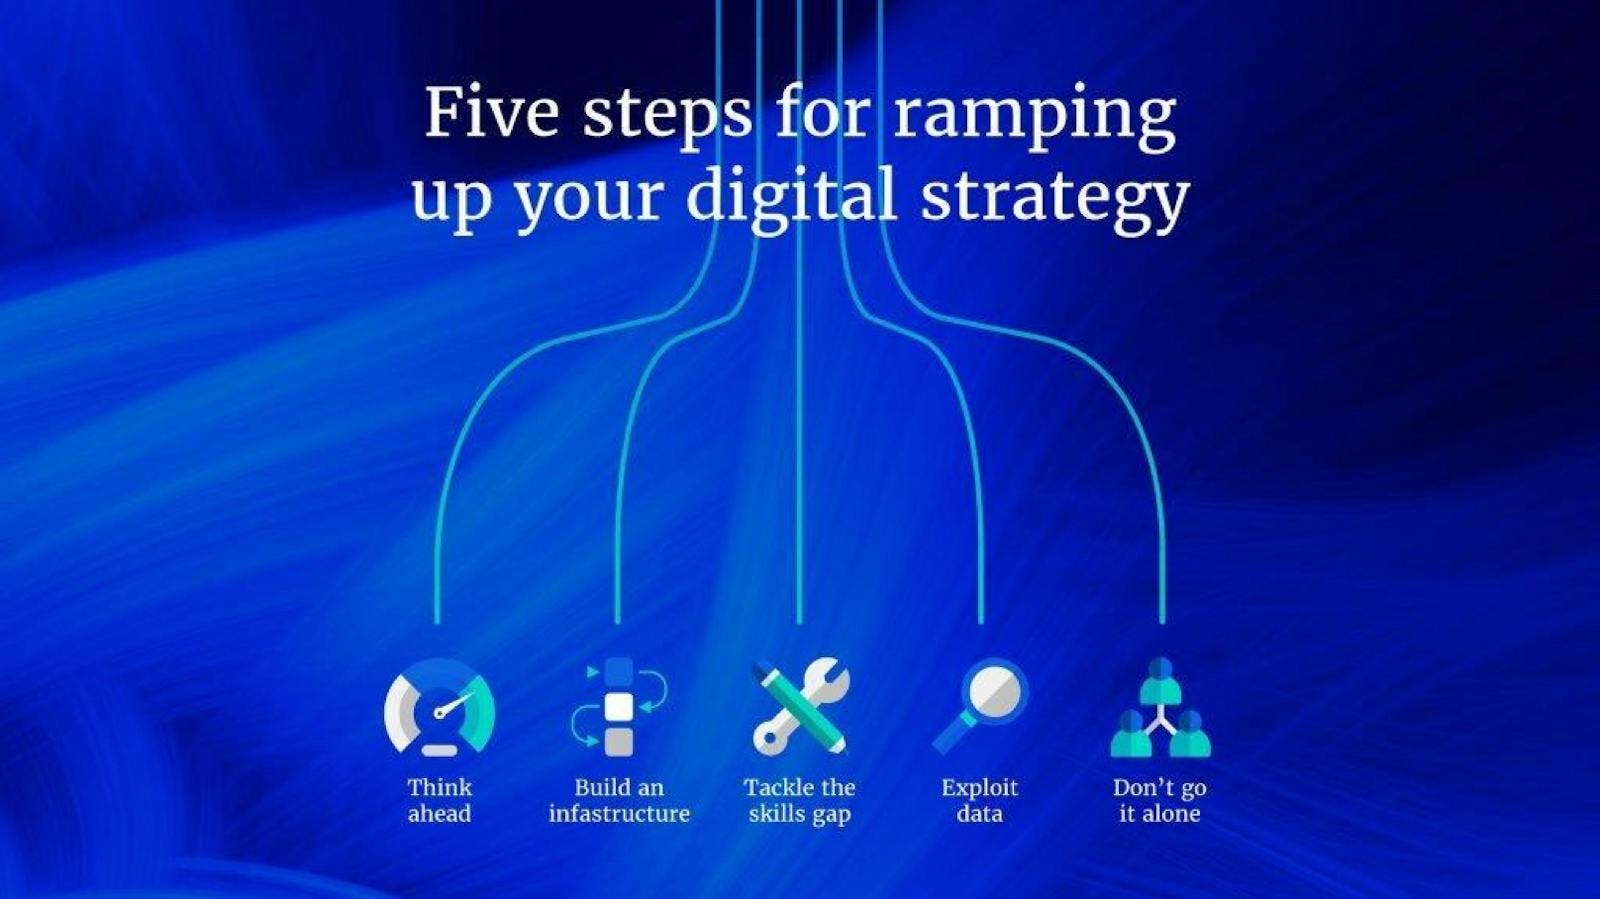 Five Steps for Ramping up your Digital Strategy - Think Ahead, Build an Infrastructure, Tackle the Skills Gap, Exploit Data, Don't Go it Alone